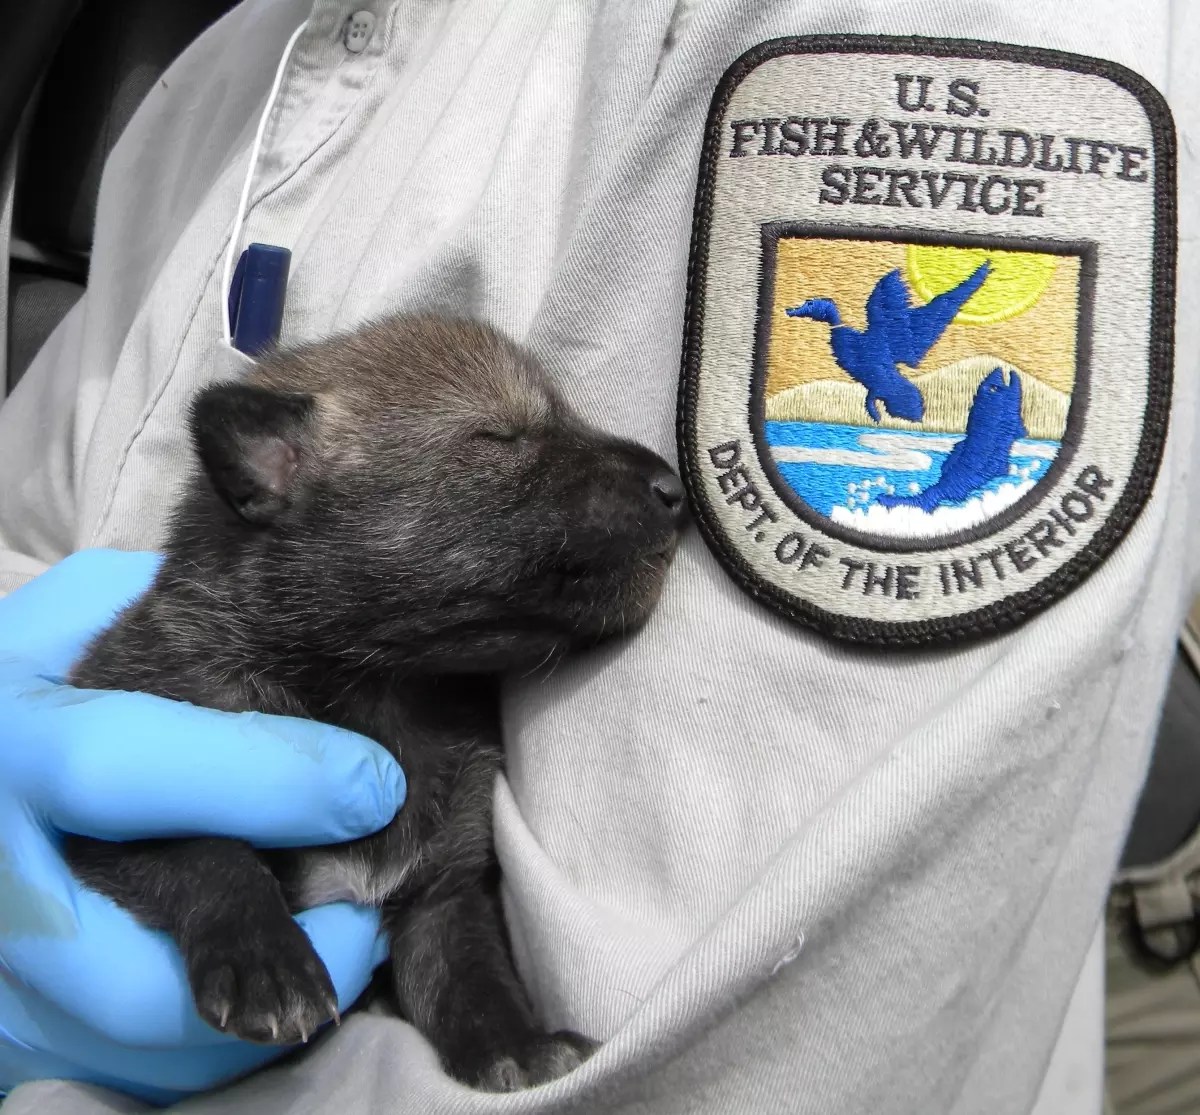 A baby wolf being held by a gloved hand, resting against a shirt that has an emblem that reads "US Fish and Wildlife Service Dept. Of the Interior"